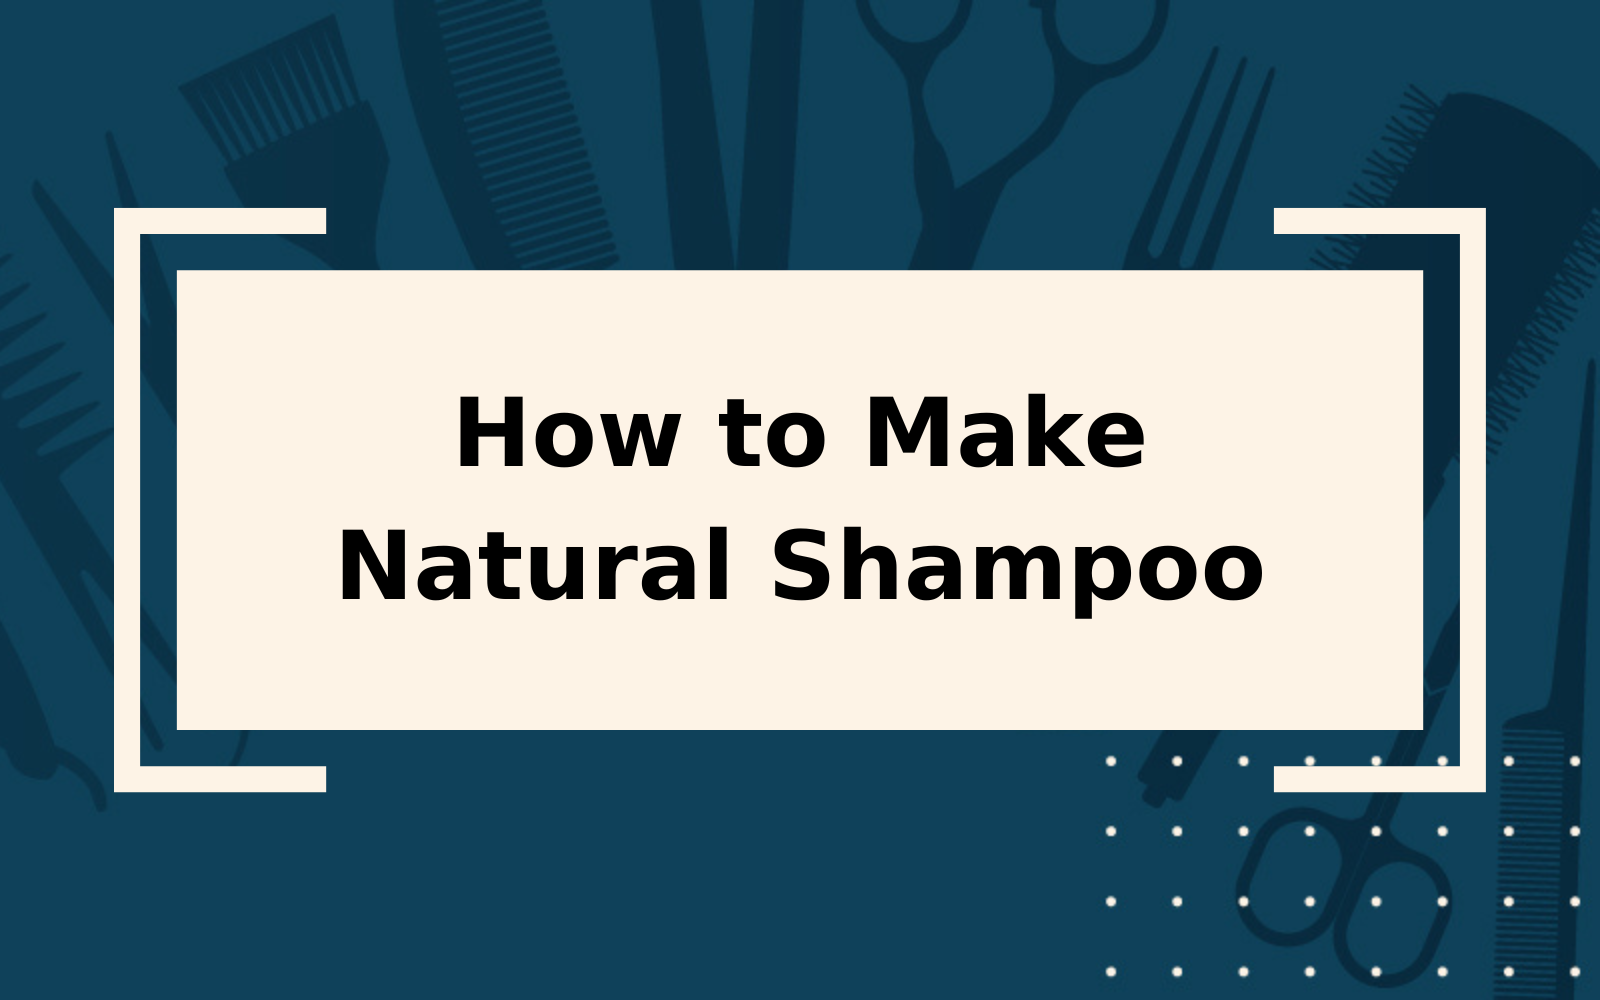 How to Make Natural Shampoo | Step-by-Step Guide